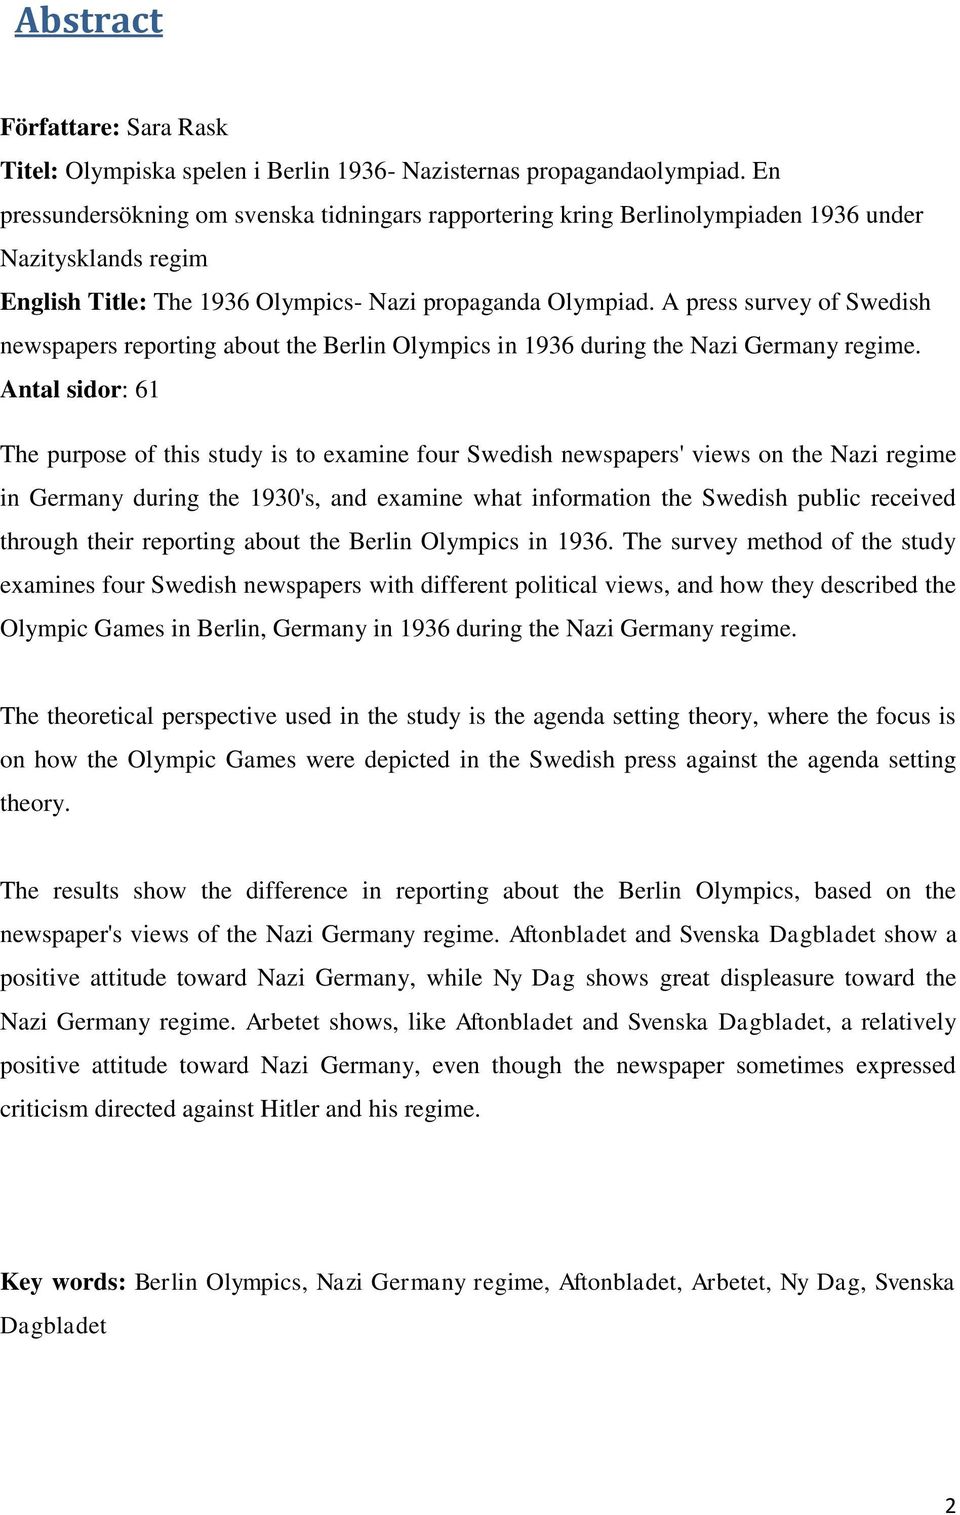 A press survey of Swedish newspapers reporting about the Berlin Olympics in 1936 during the Nazi Germany regime.